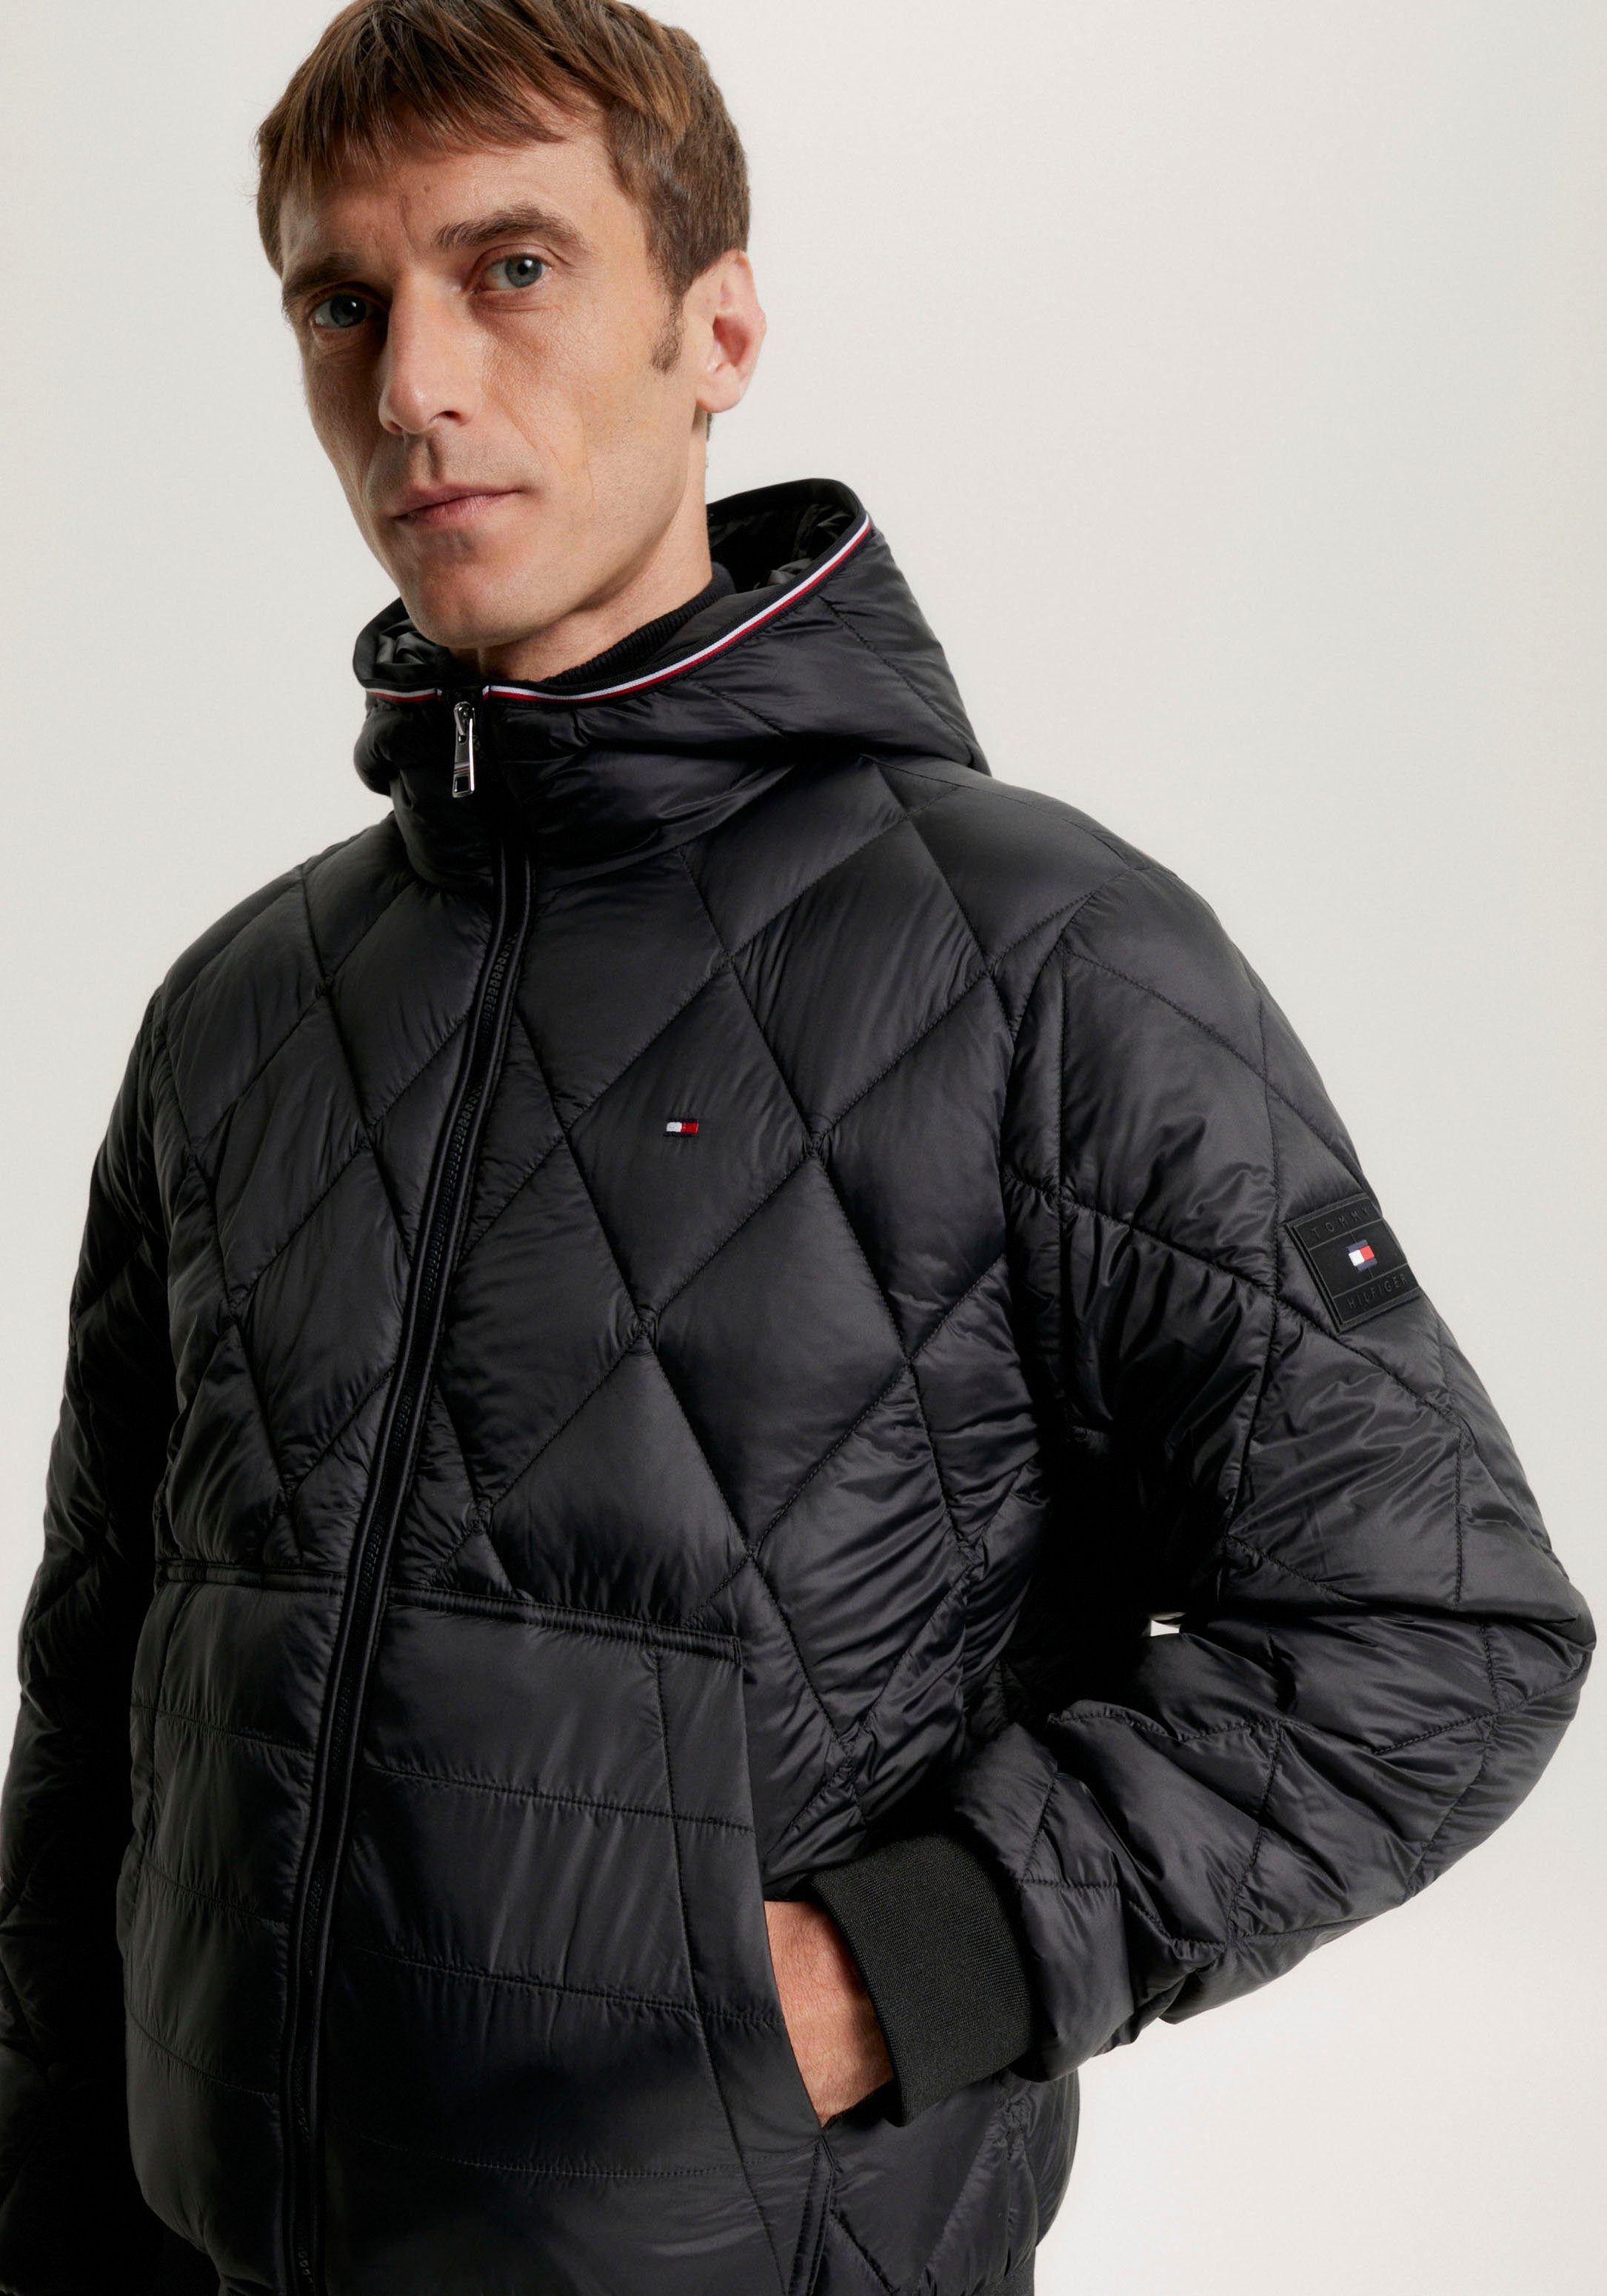 Steppjacke Tommy RECYCLED Black Hilfiger QUILT MIX